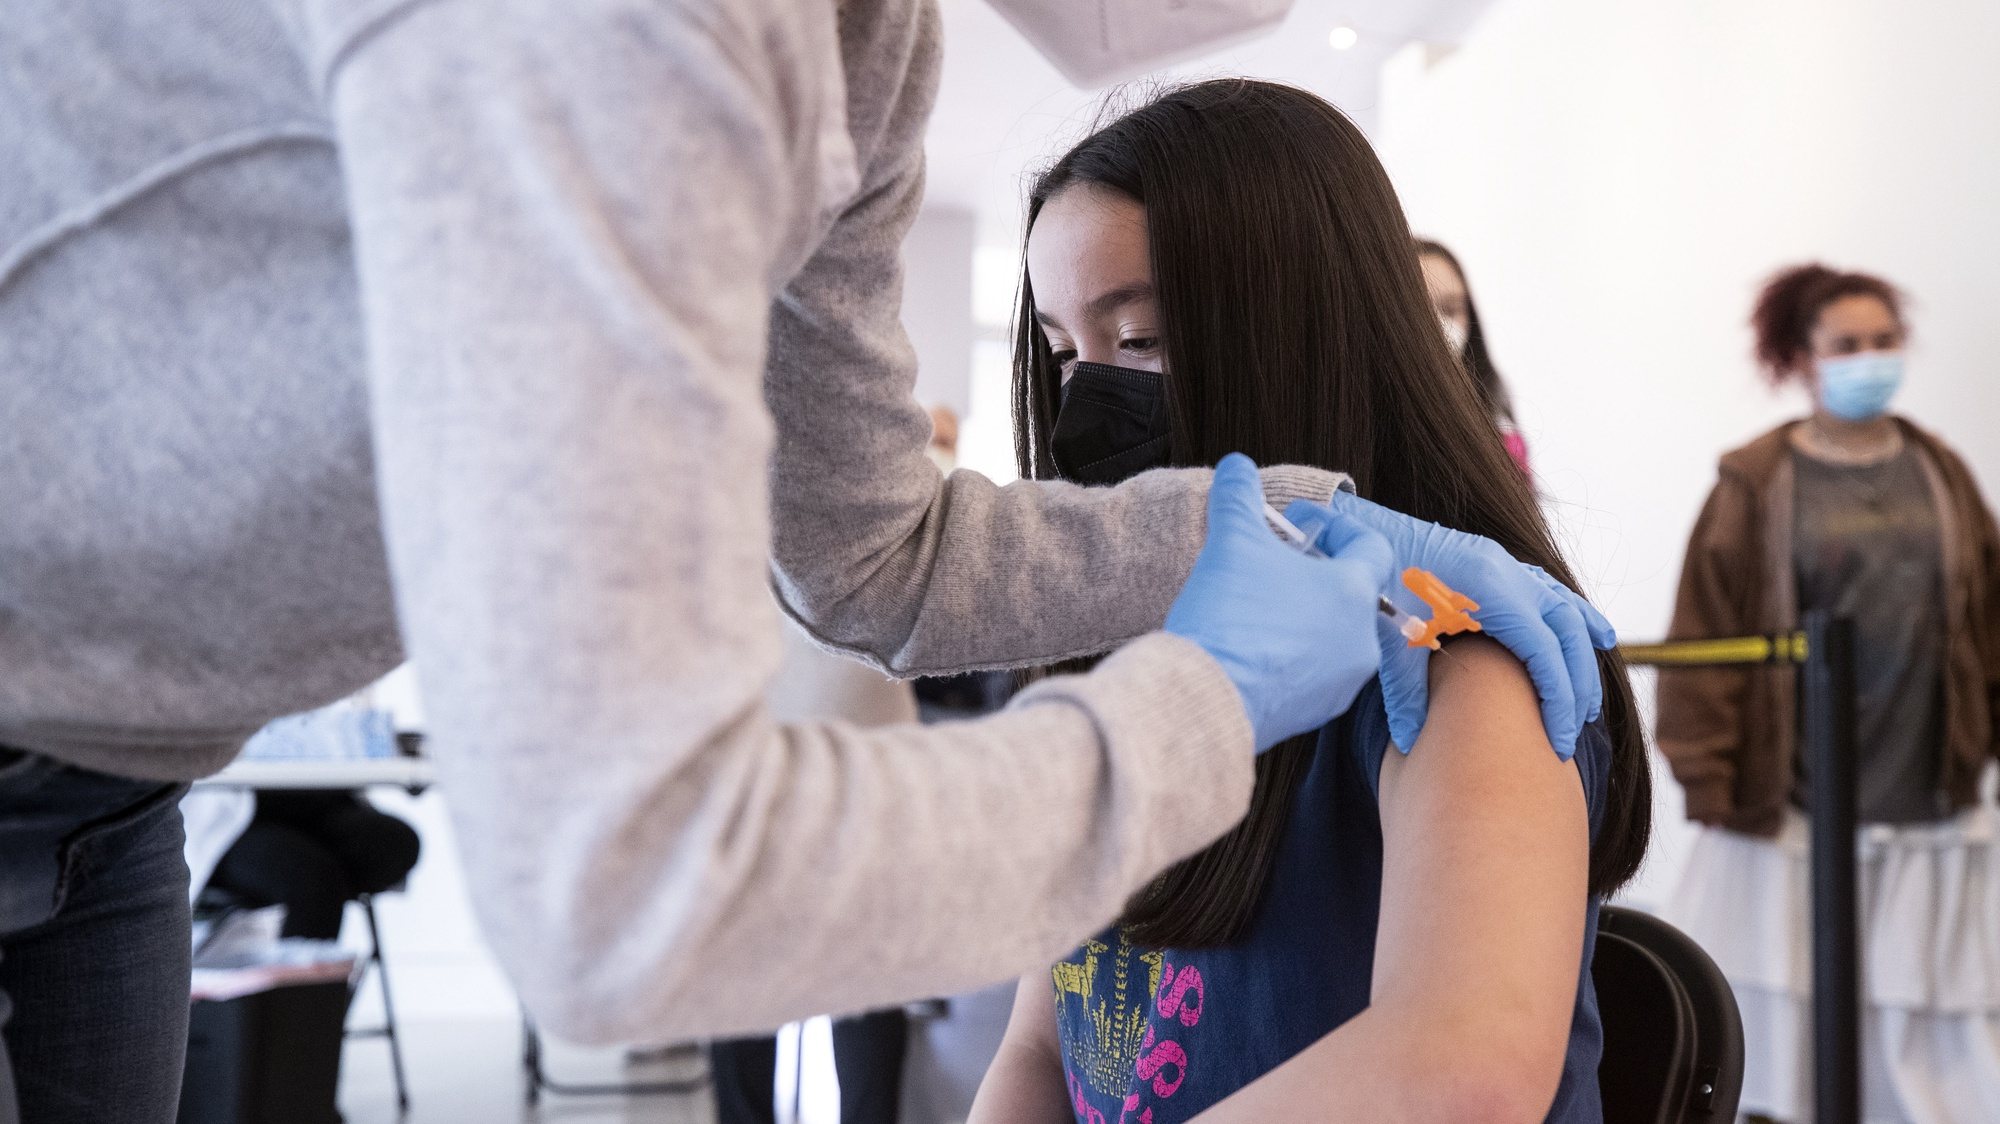 epa09198572 A 15-year-old girl receives a dose of COVID-19 vaccine during a vaccination drive organized by the Annenberg Foundation and Mickey Fine Pharmacy for teenagers aged between 12 and 15 at the Annenberg Foundation in Los Angeles, California, USA, 13 may 2021. The Pfizer vaccine was cleared on 13 May to be inoculated in people of 12 years of age and older.  EPA/ETIENNE LAURENT